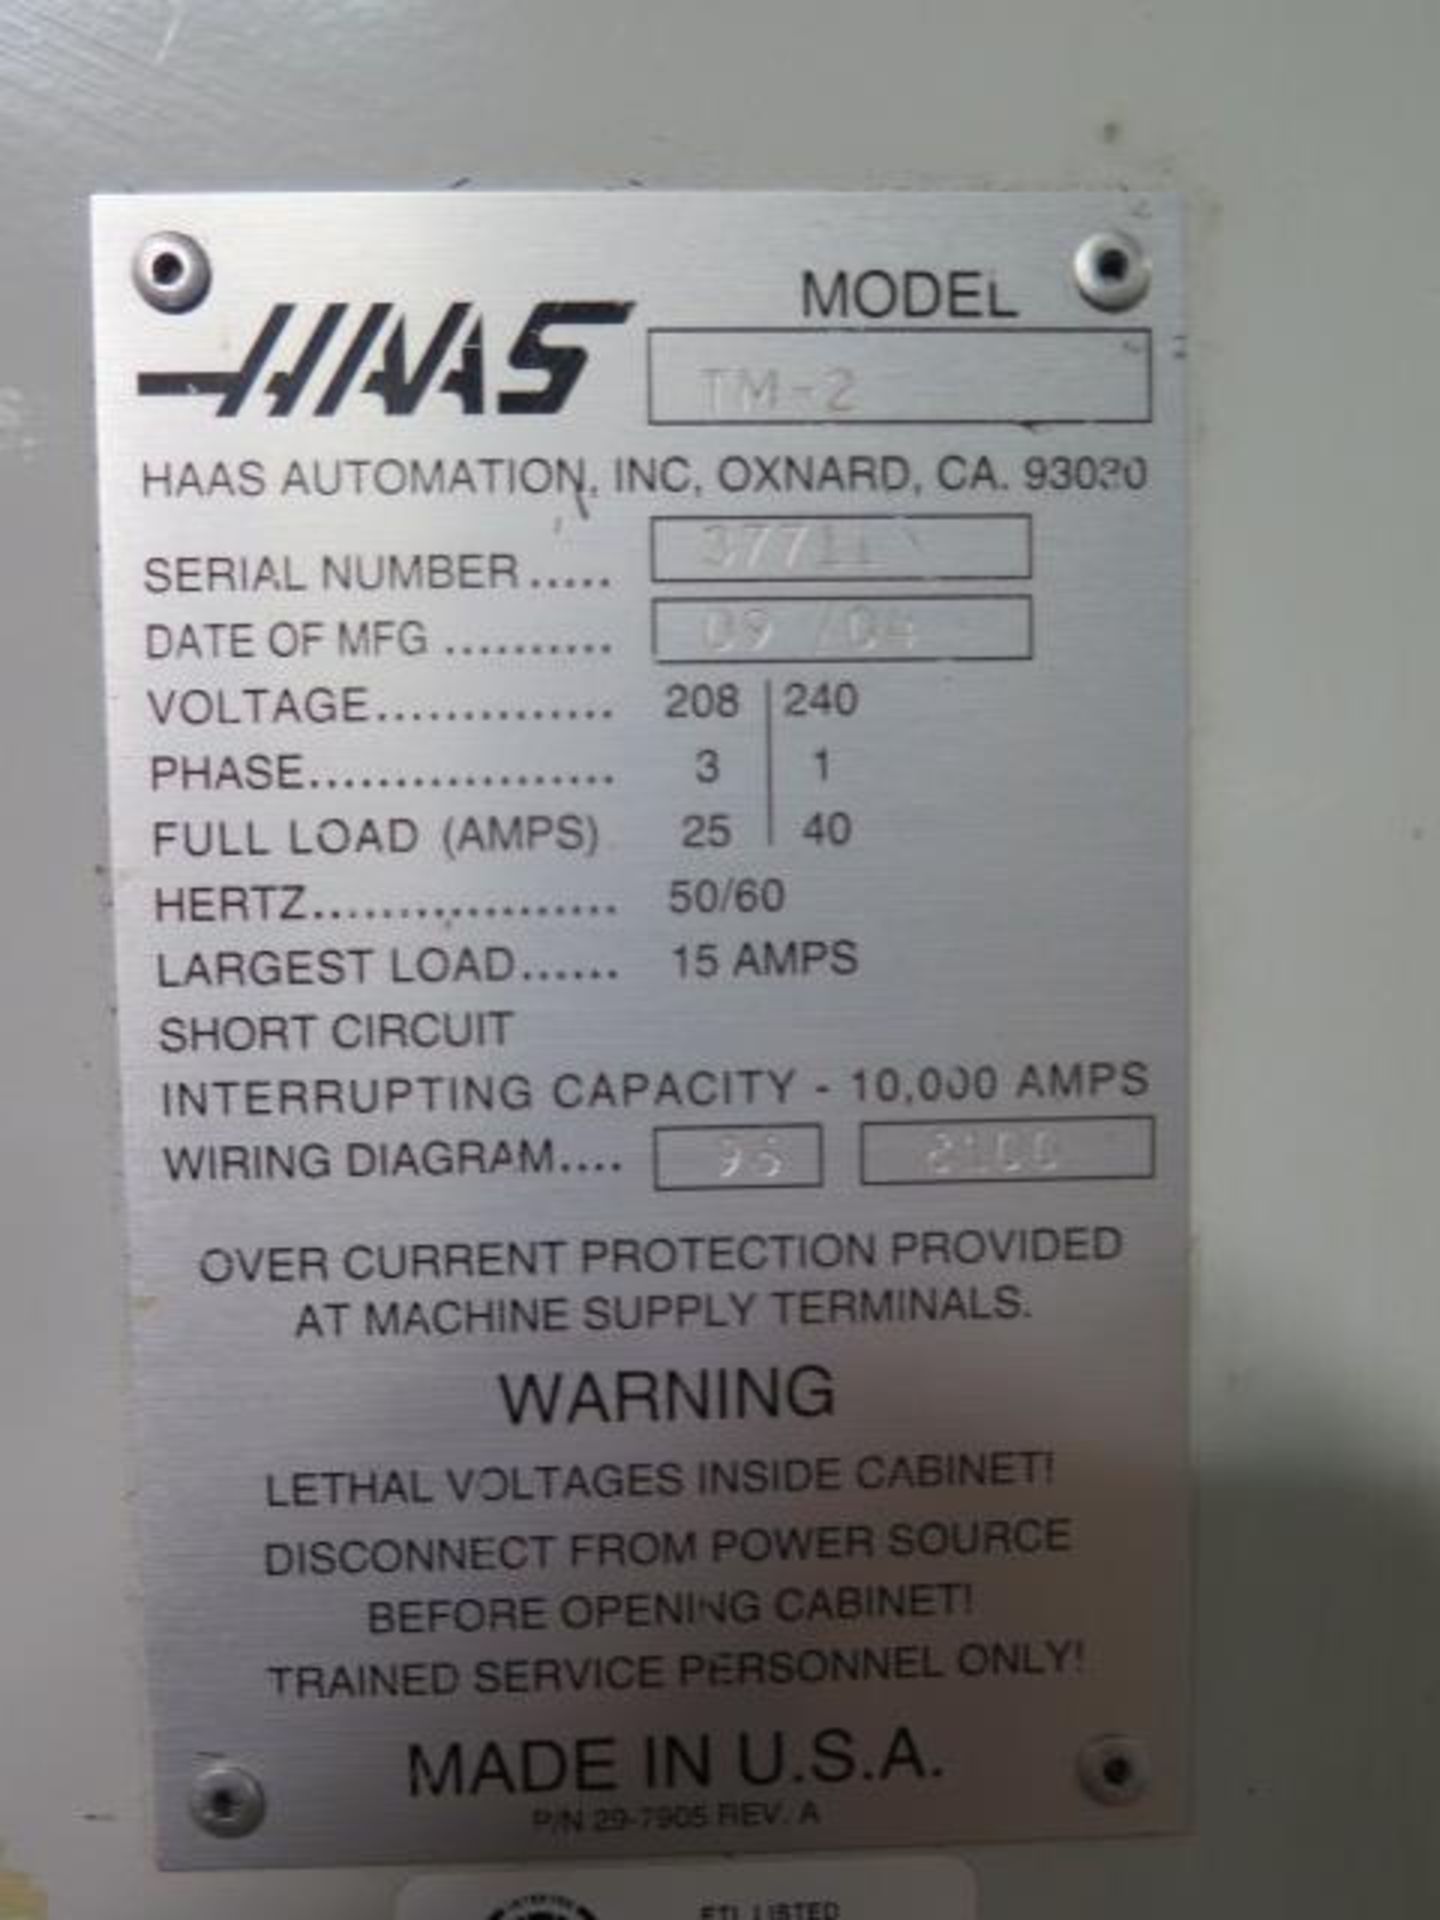 2004 Haas TM-2 “Mini Mill” CNC VMC s/n 37711 w/ Haas Controls, 10 ATC, SOLD AS IS, LIVERMORE, CA - Image 15 of 15